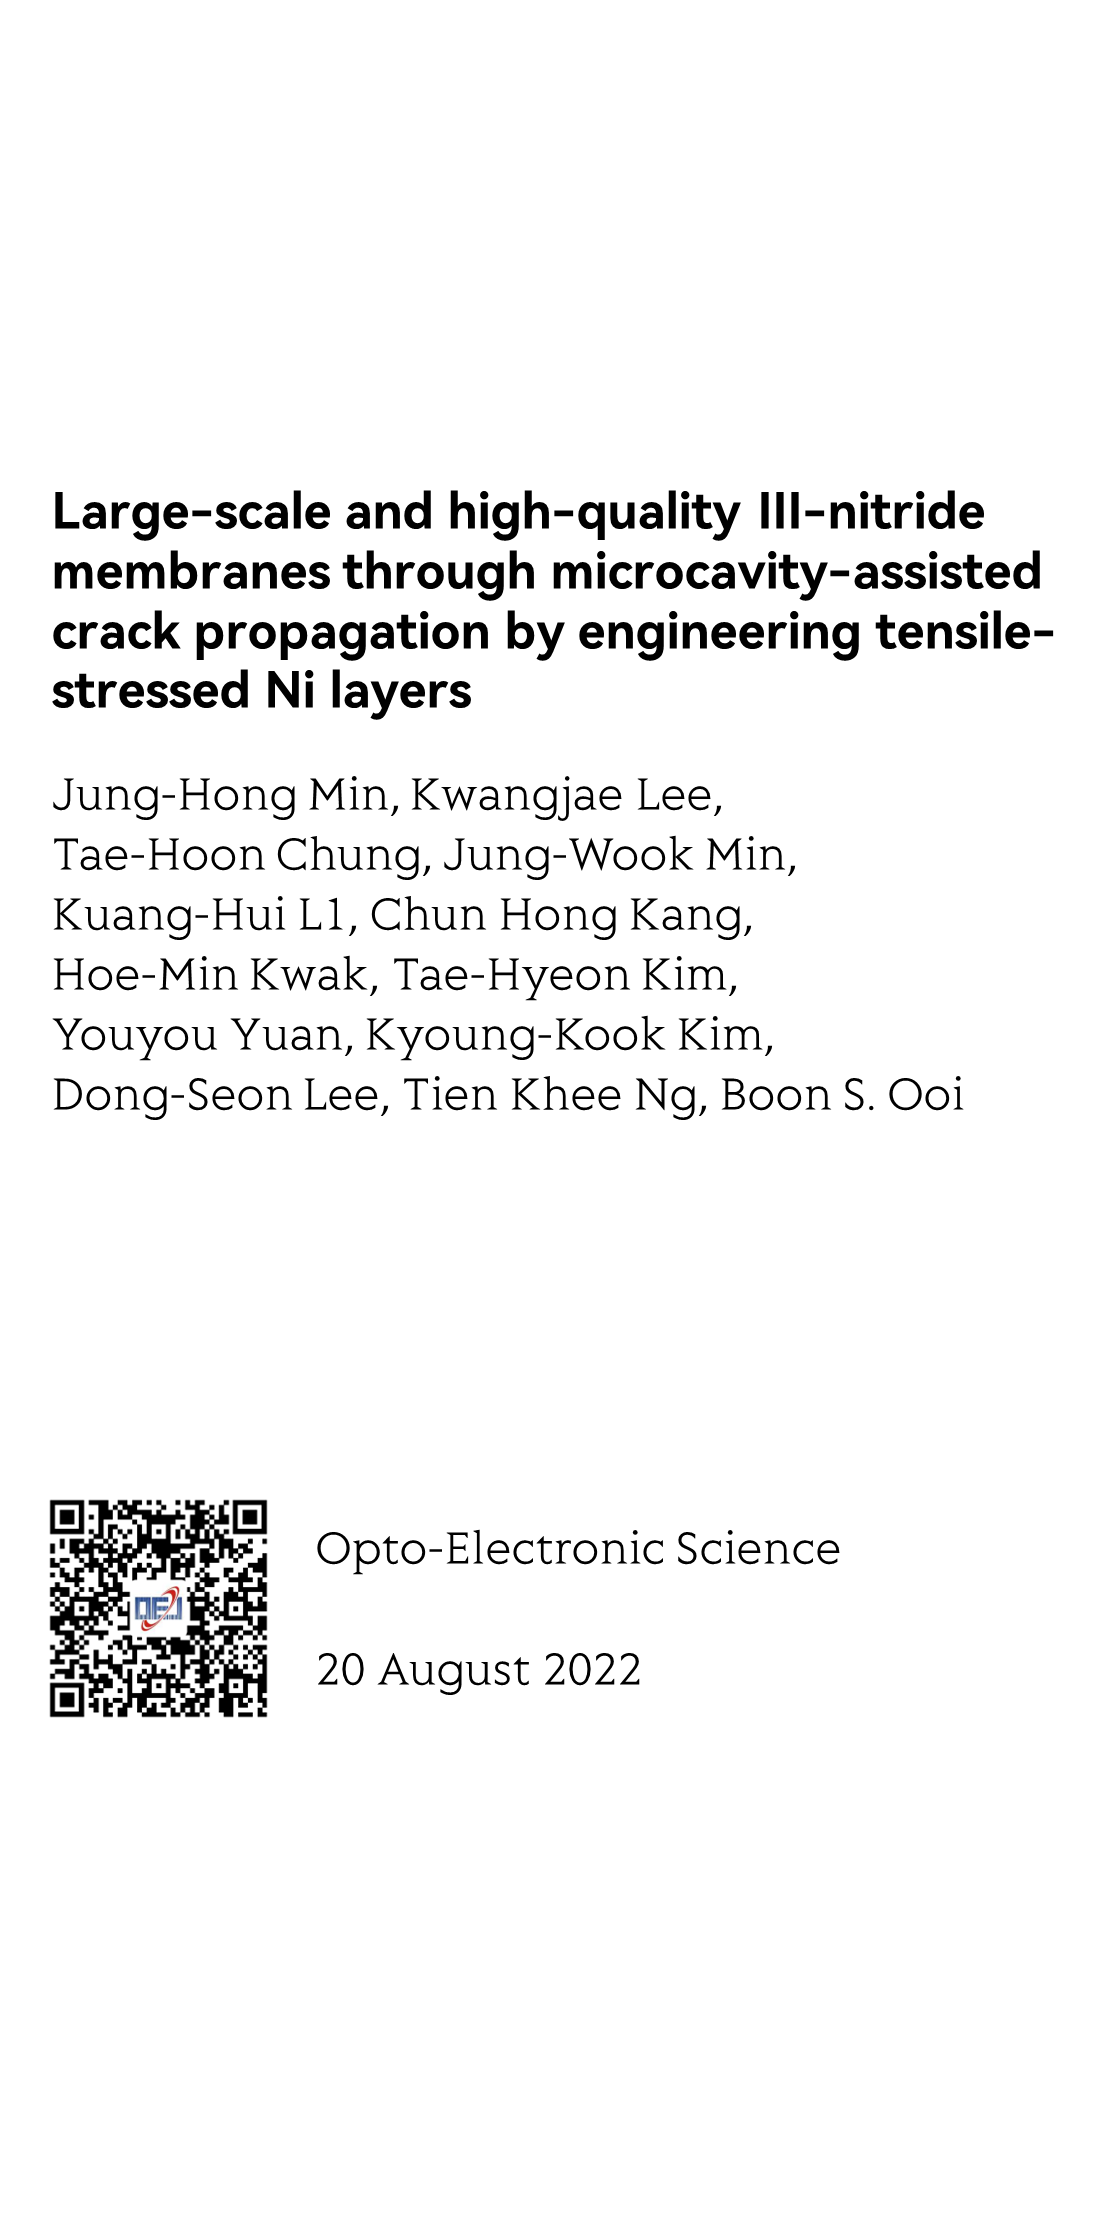 Large-scale and high-quality III-nitride membranes through microcavity-assisted crack propagation by engineering tensile-stressed Ni layers_1